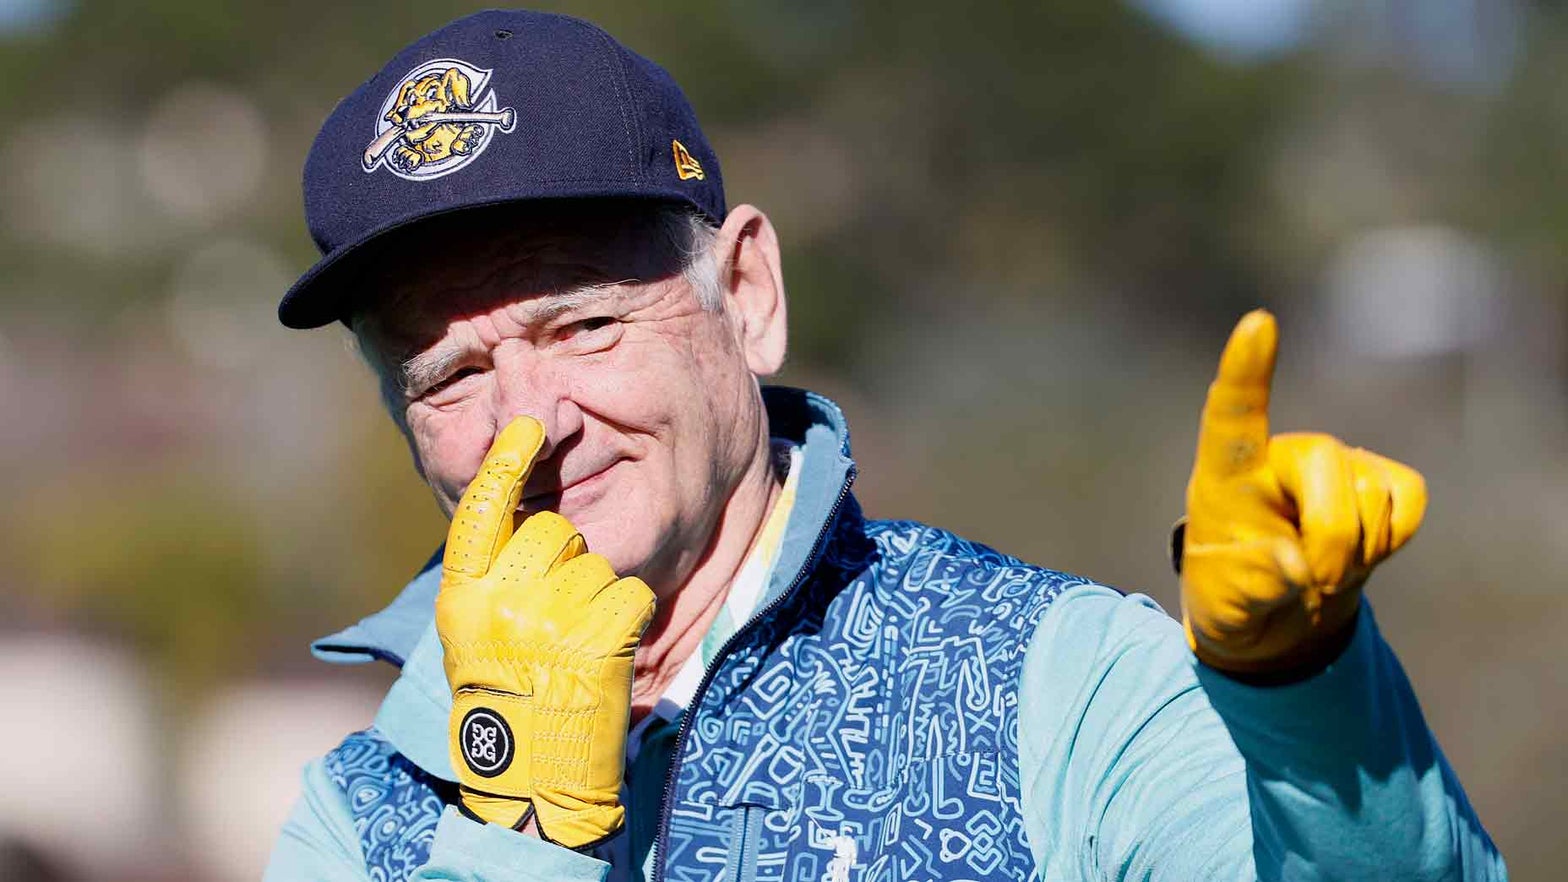 What it's like to play the AT&T Pebble Beach ProAm alongside Bill Murray